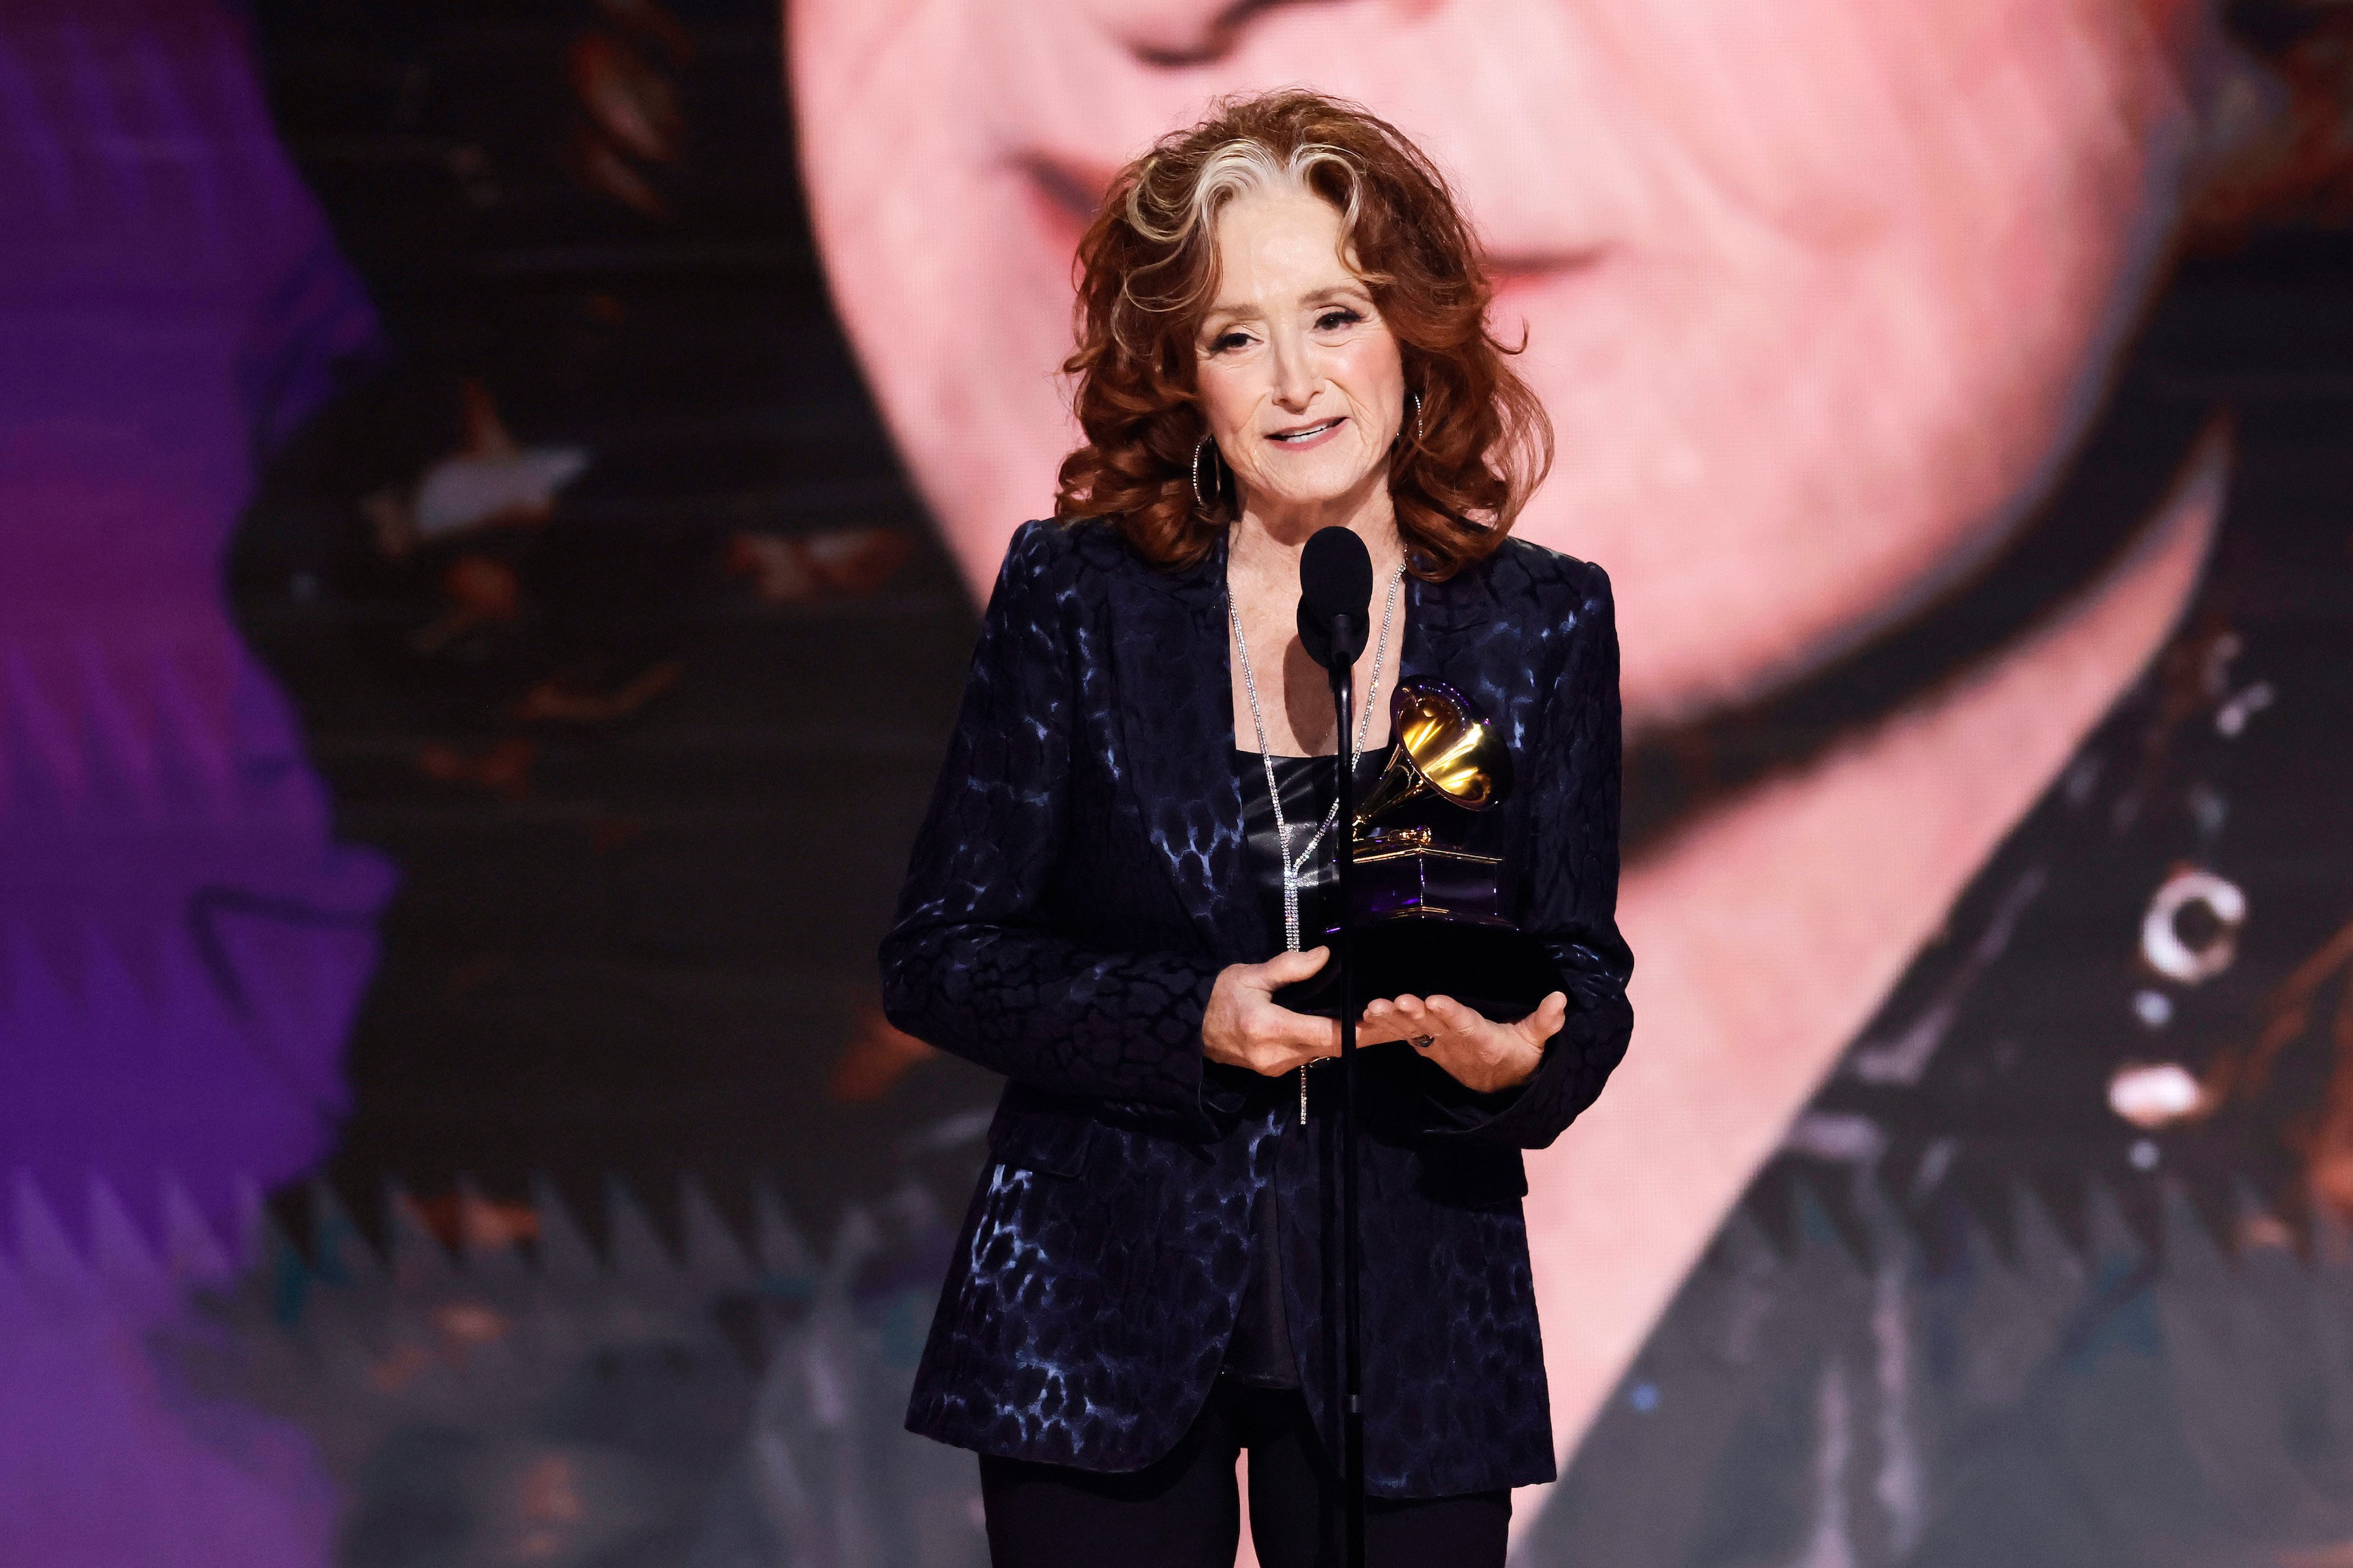 2023 Grammy Awards 'Just Like That' by Bonnie Raitt Wins Song of the Year